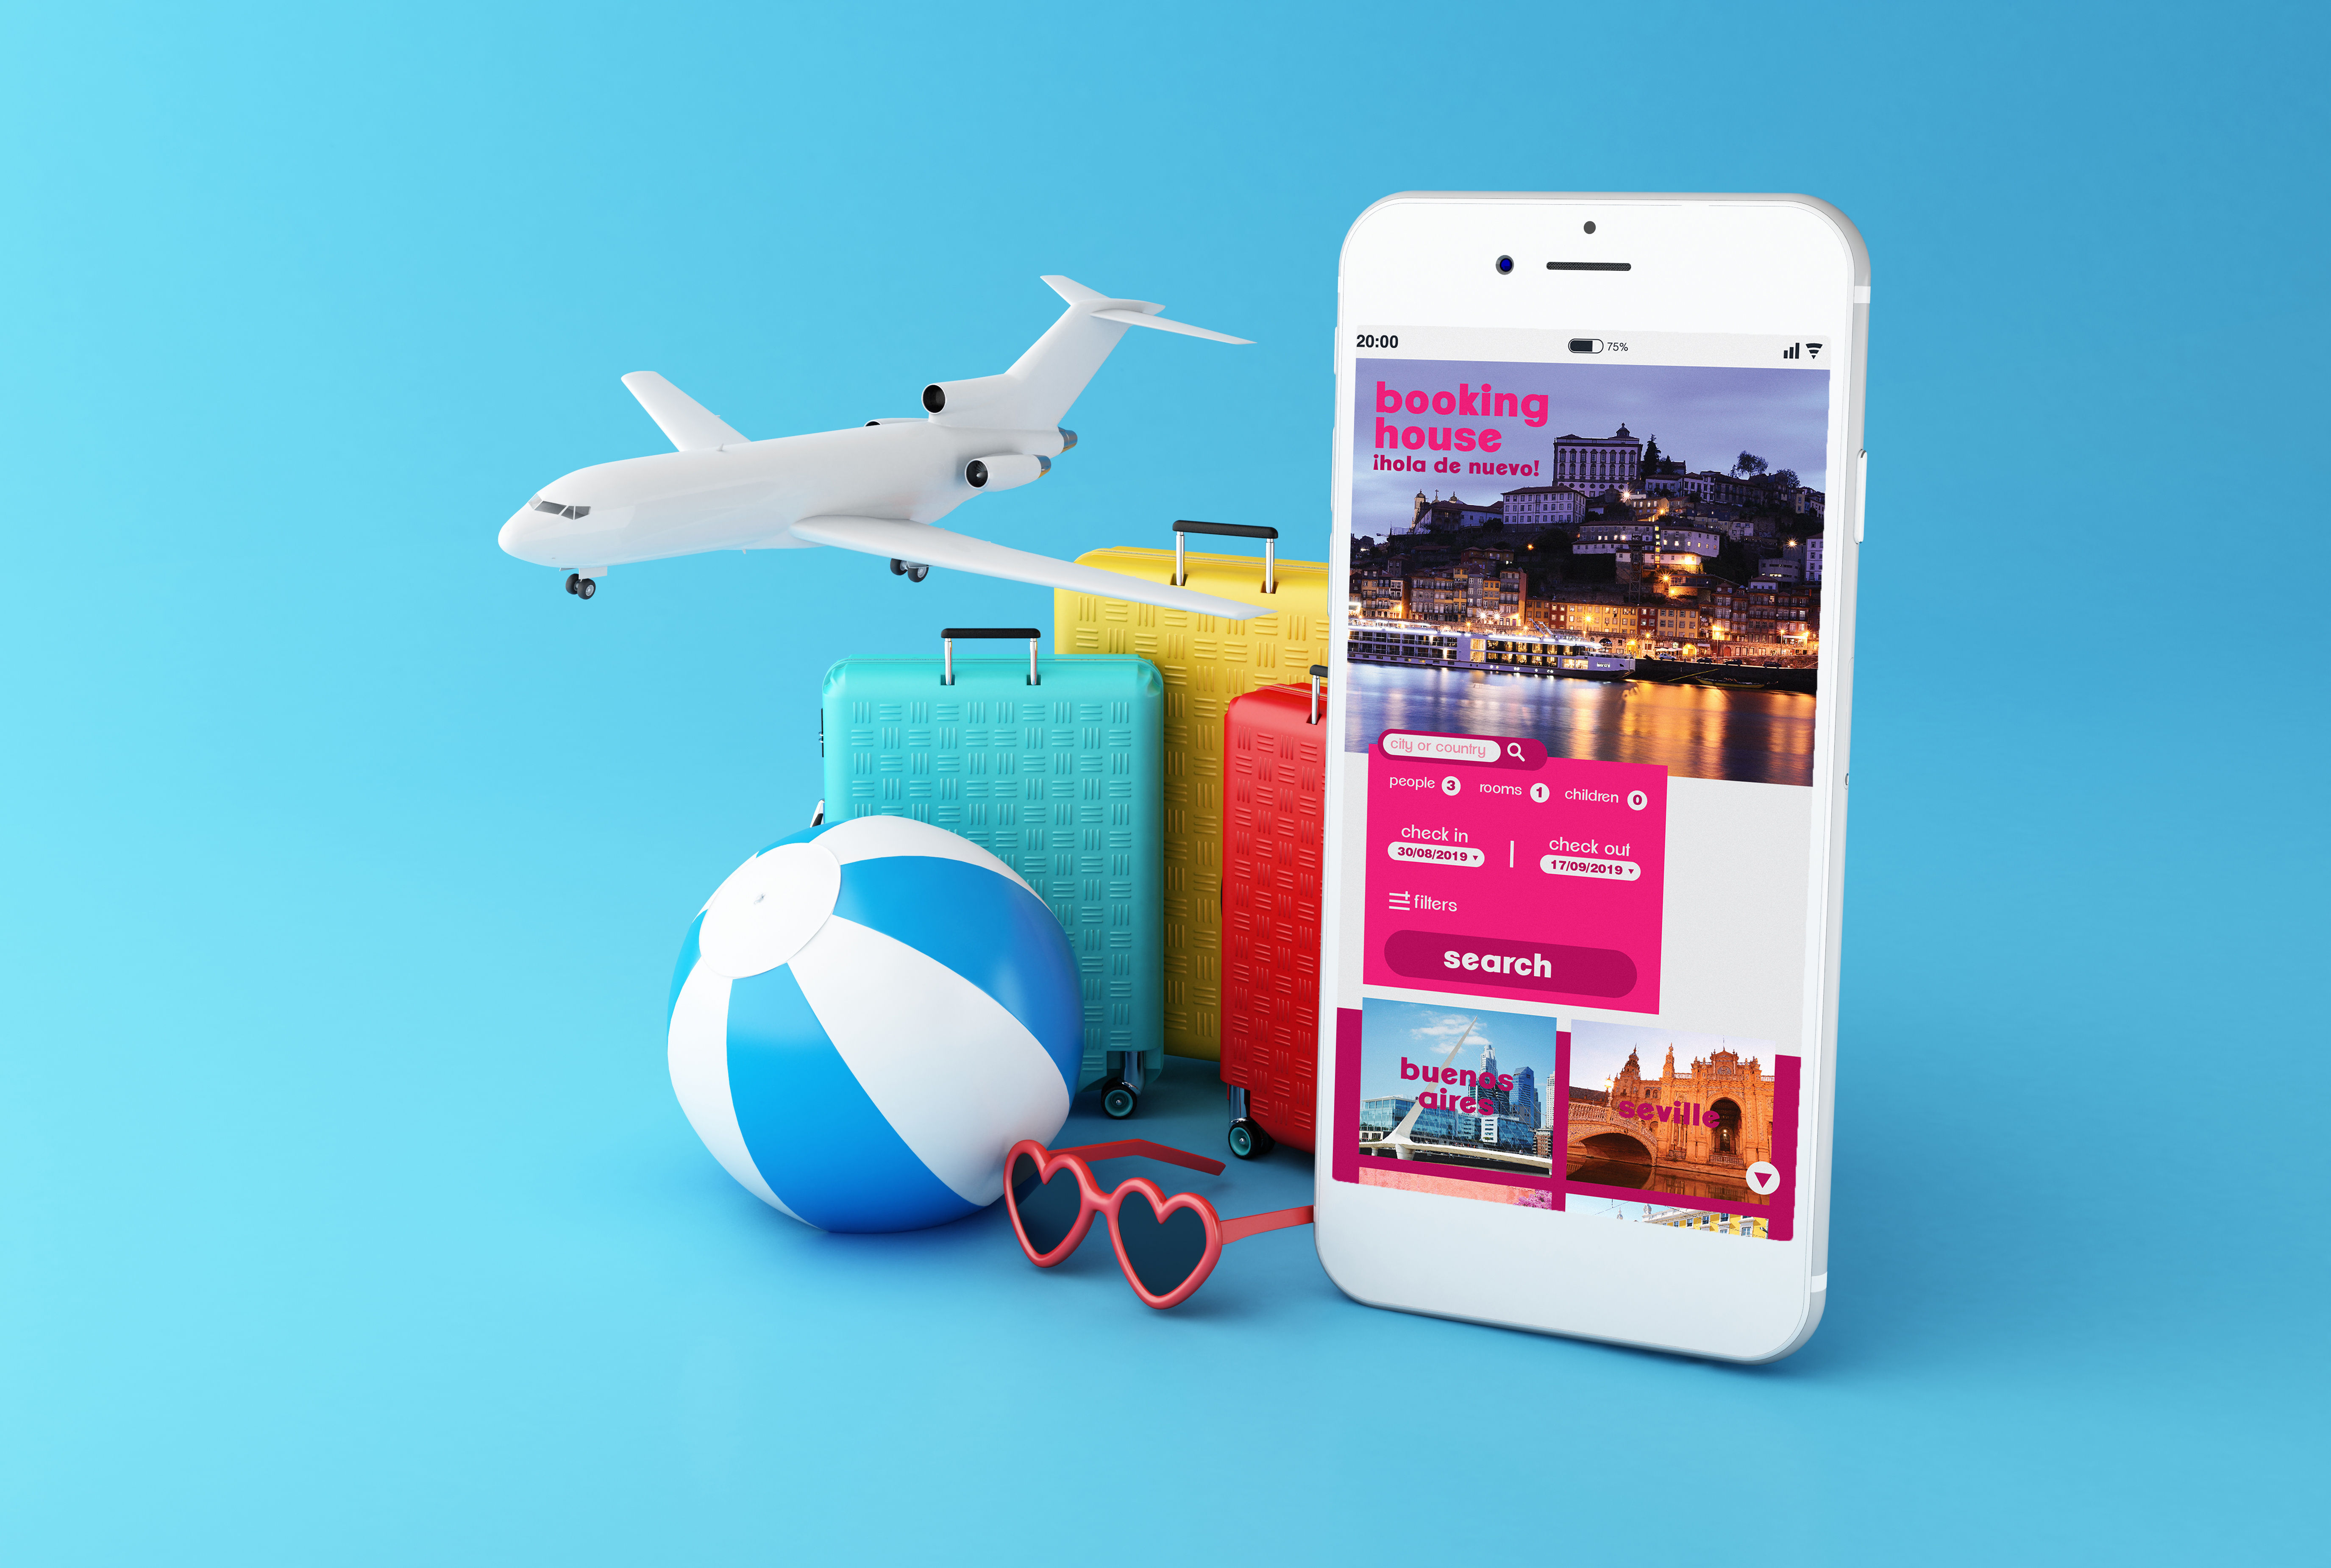 Travel app bookings grew 16% as consumers embrace digital solutions